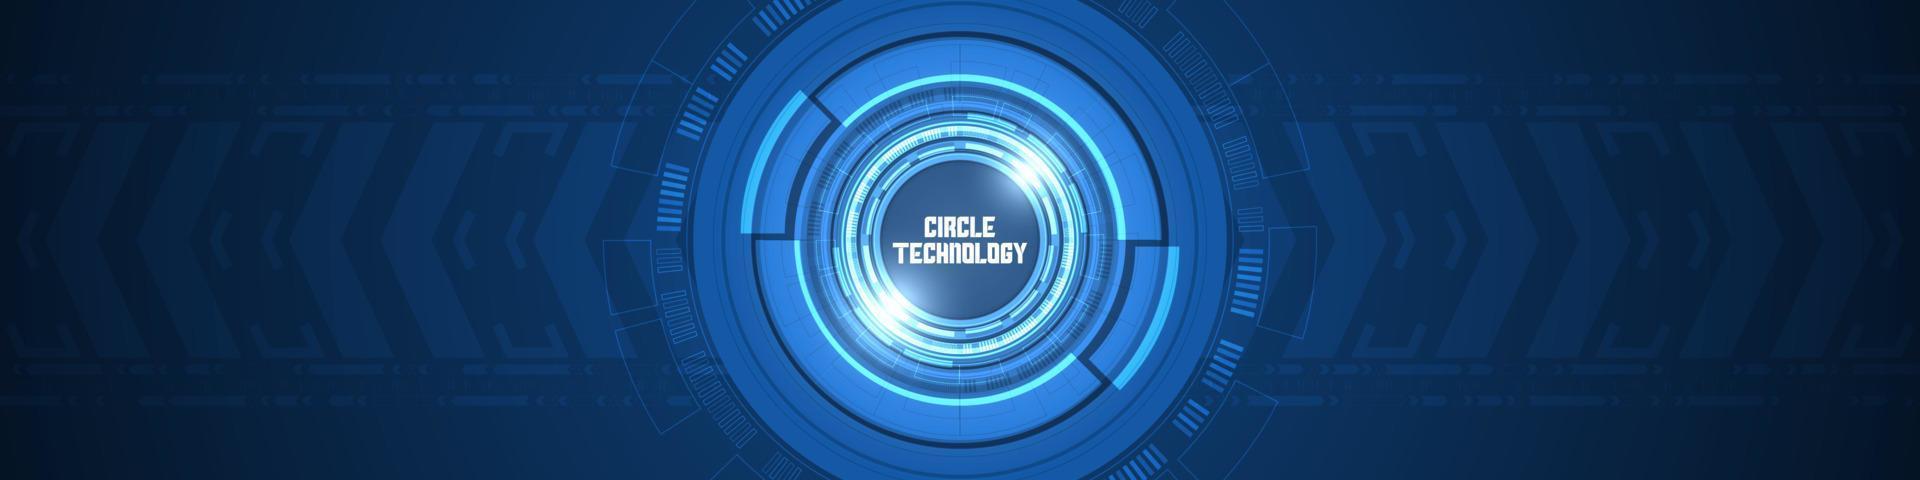 Abstract circle digital technology, arrow speed up background, smart lens, overlap layer, light effect, design concept, blank space vector